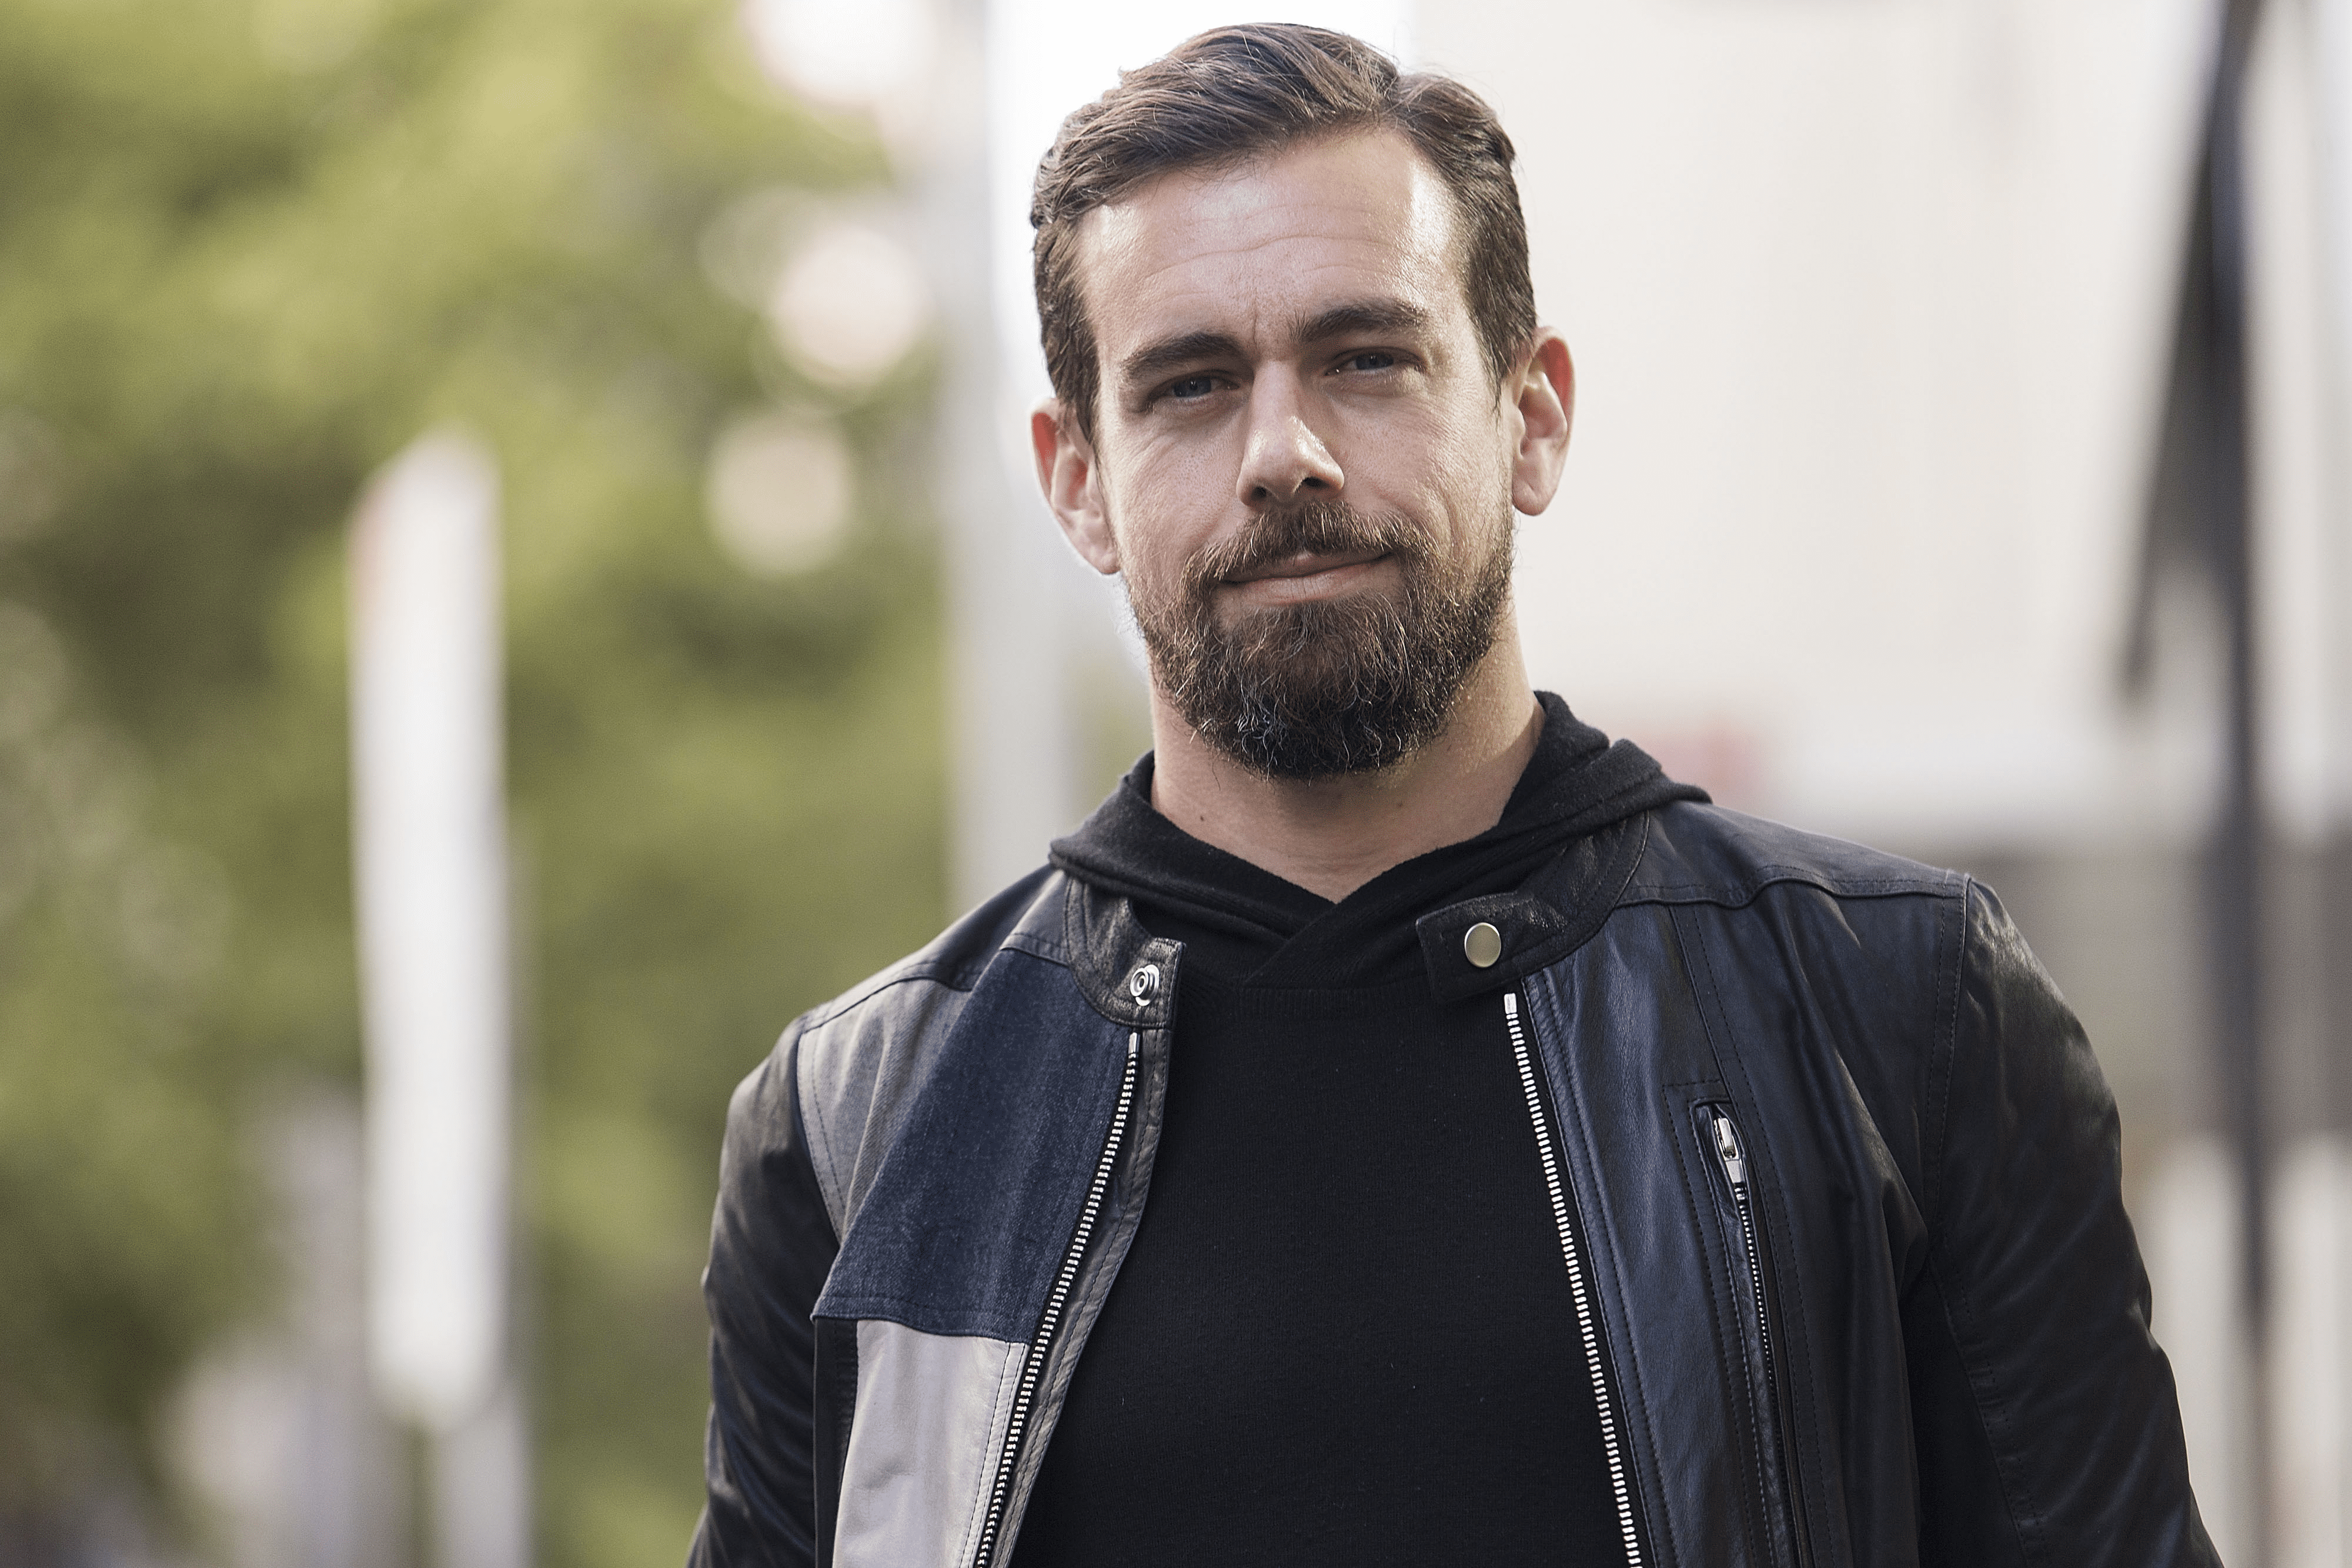 Jack Dorsey, co-founder and CEO of Square and Twitter, poses for a portrait at Black Velvet Espresso, 2016, Melbourne, Australia. | Photo: Getty Images